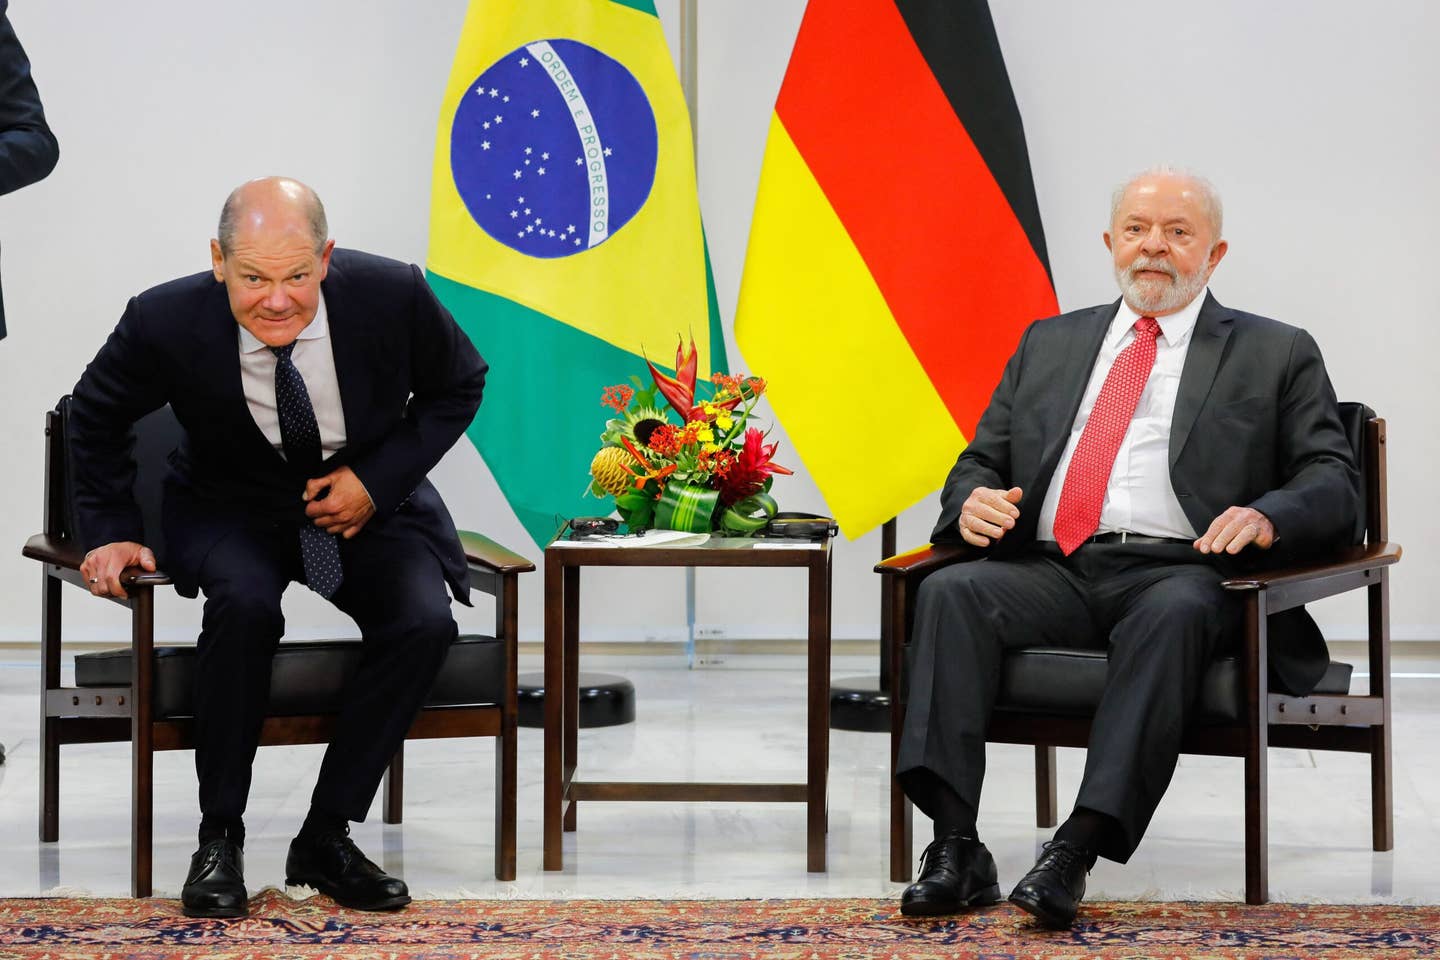 Brazilian President Luiz Inacio Lula da Silva (right) and German Chancellor Olaf Scholz (left) take part in a meeting in Brasilia, on January 30, 2023. <em>Photo by SERGIO LIMA/AFP via Getty Images</em>